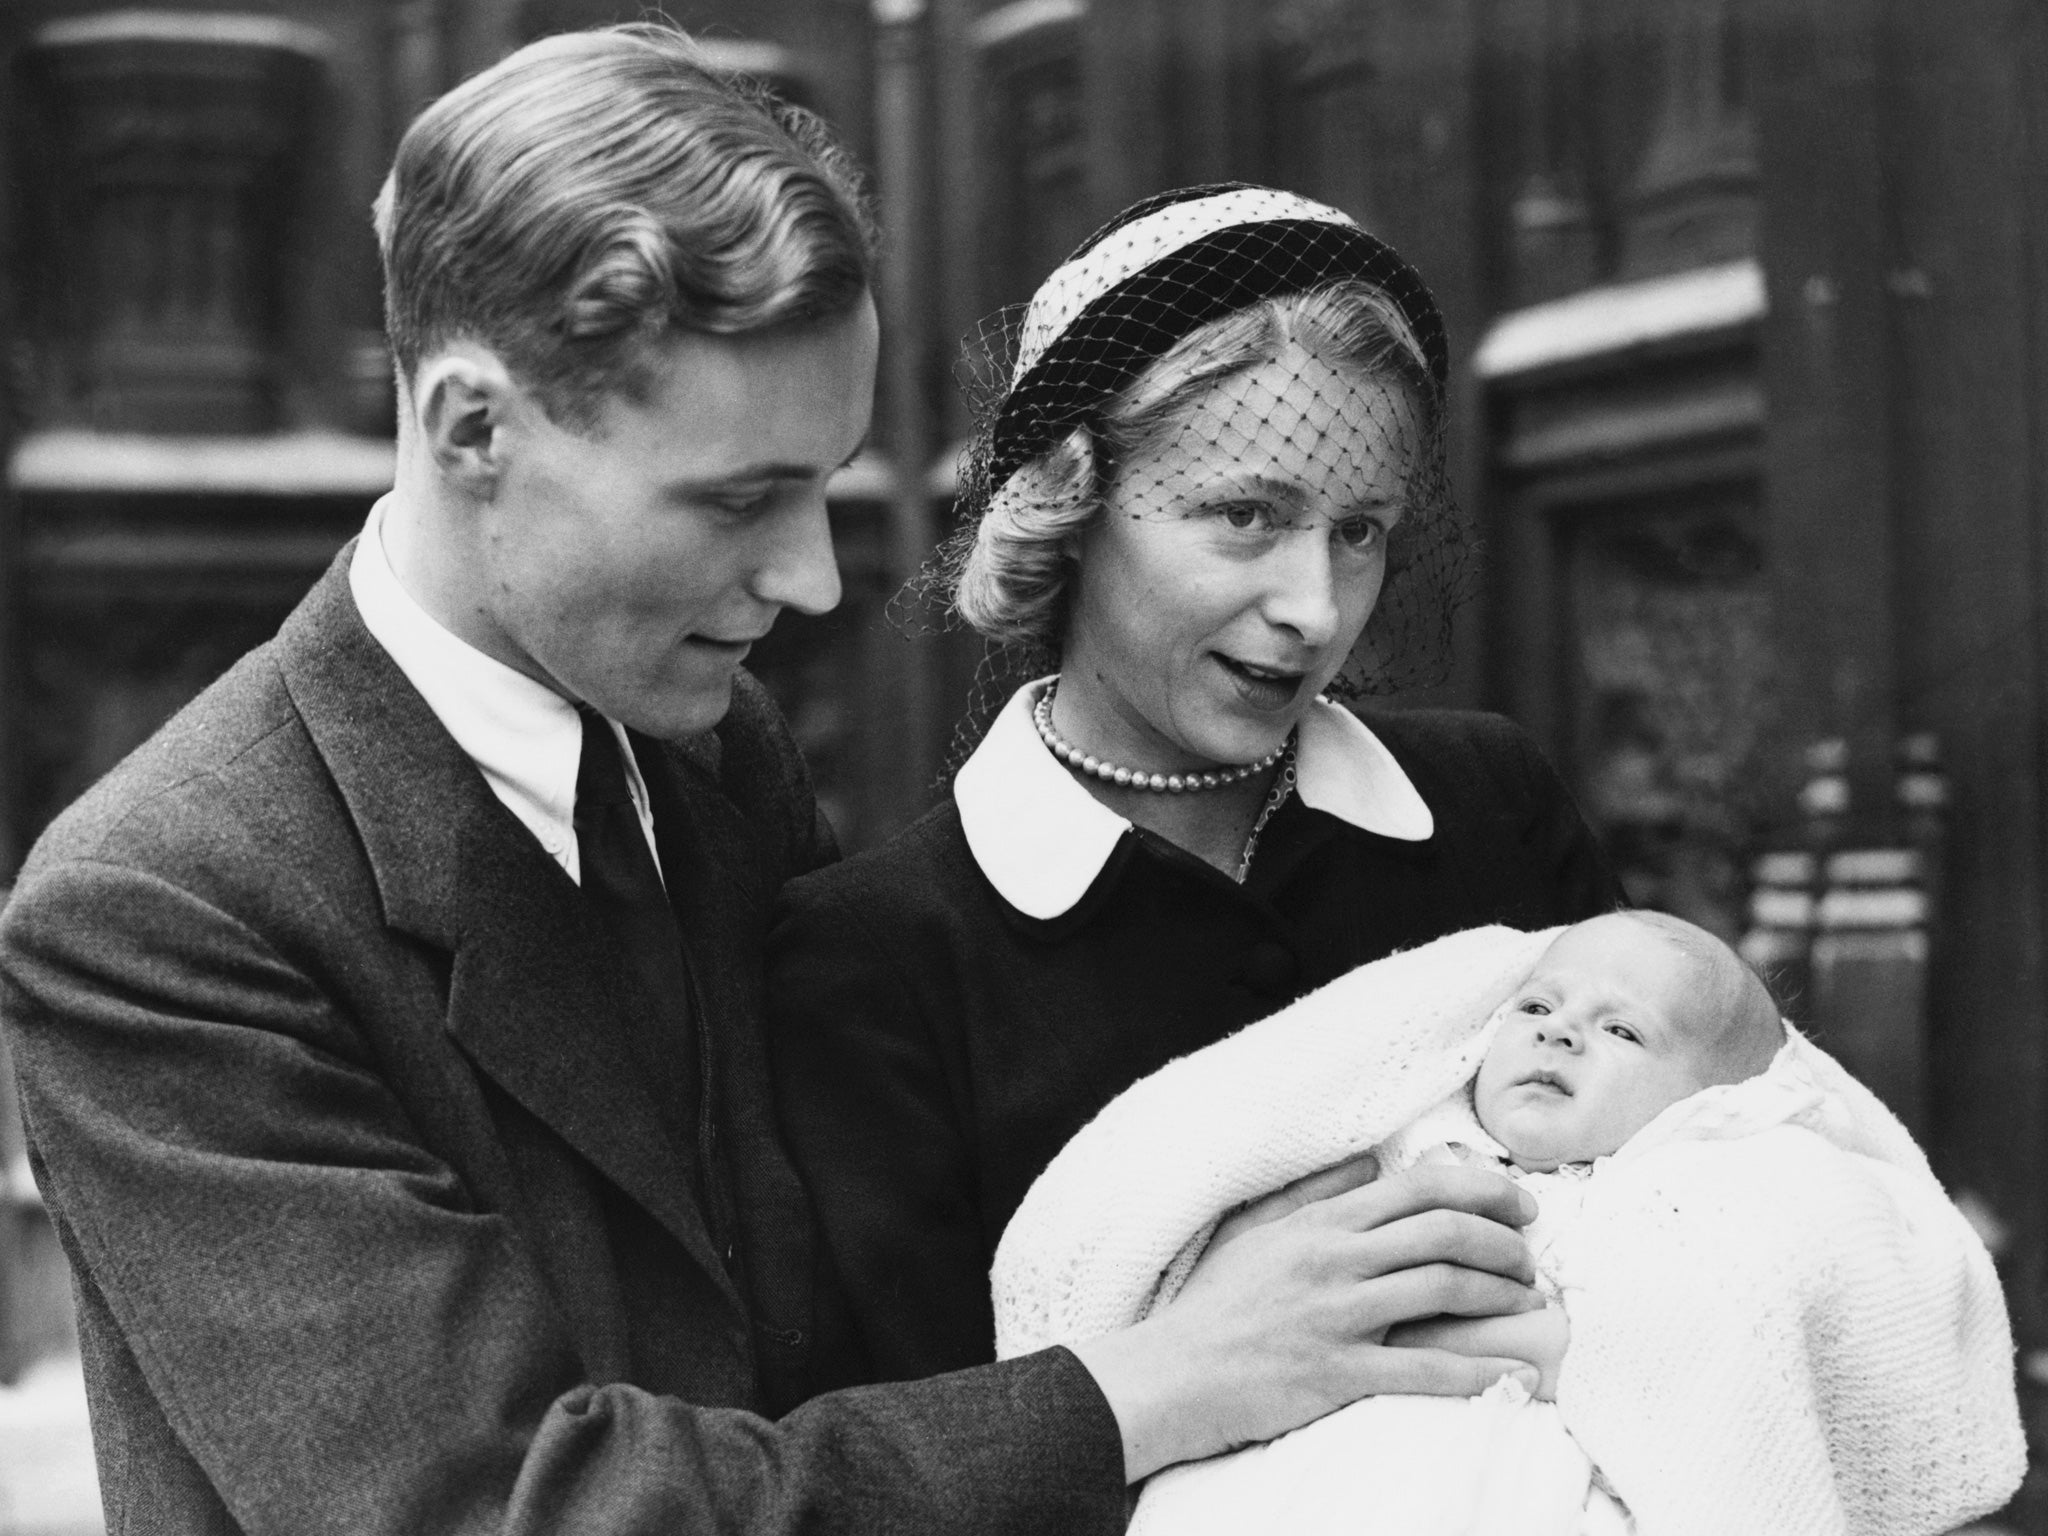 October 1951: Tony Benn with his wife, Caroline (1926 - 2000) and their son, Stephen, after his Christening at the House of Commons crypt